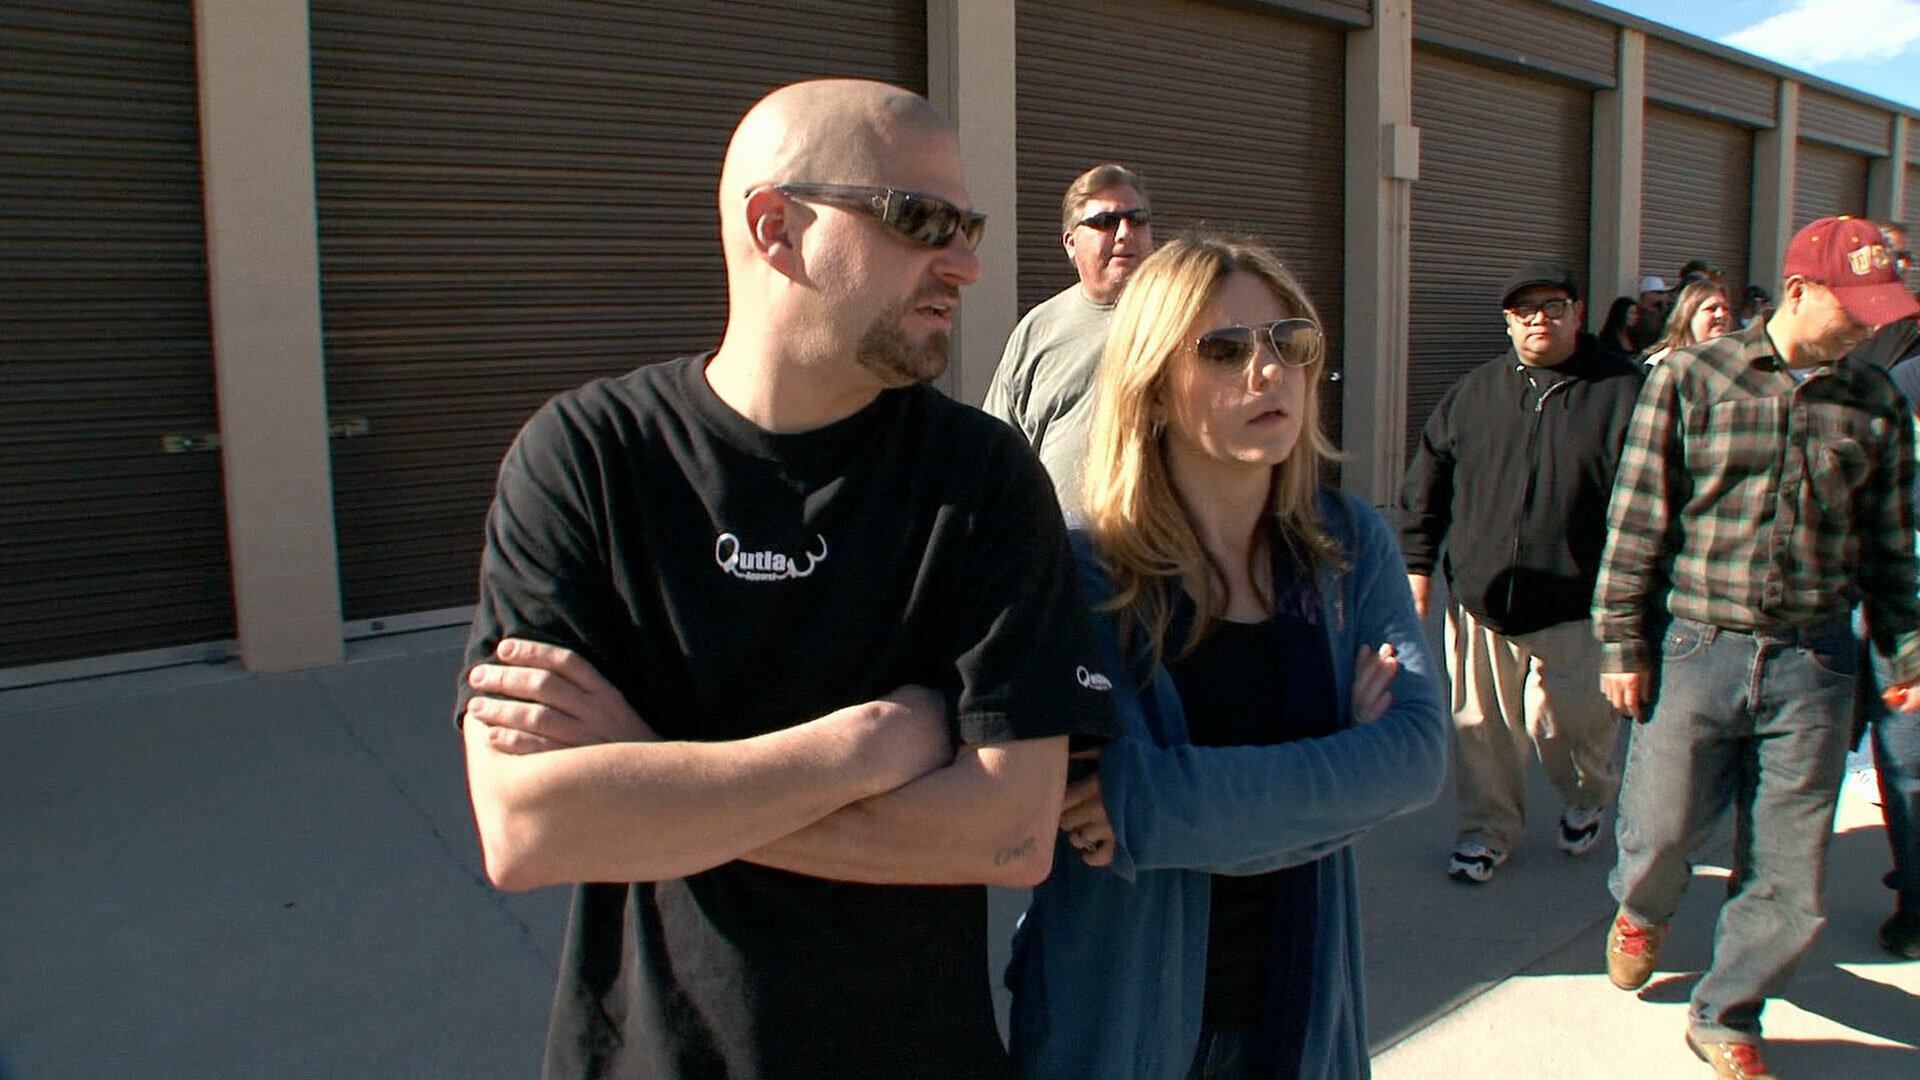 Storage Wars S1E13 Young with the Gun